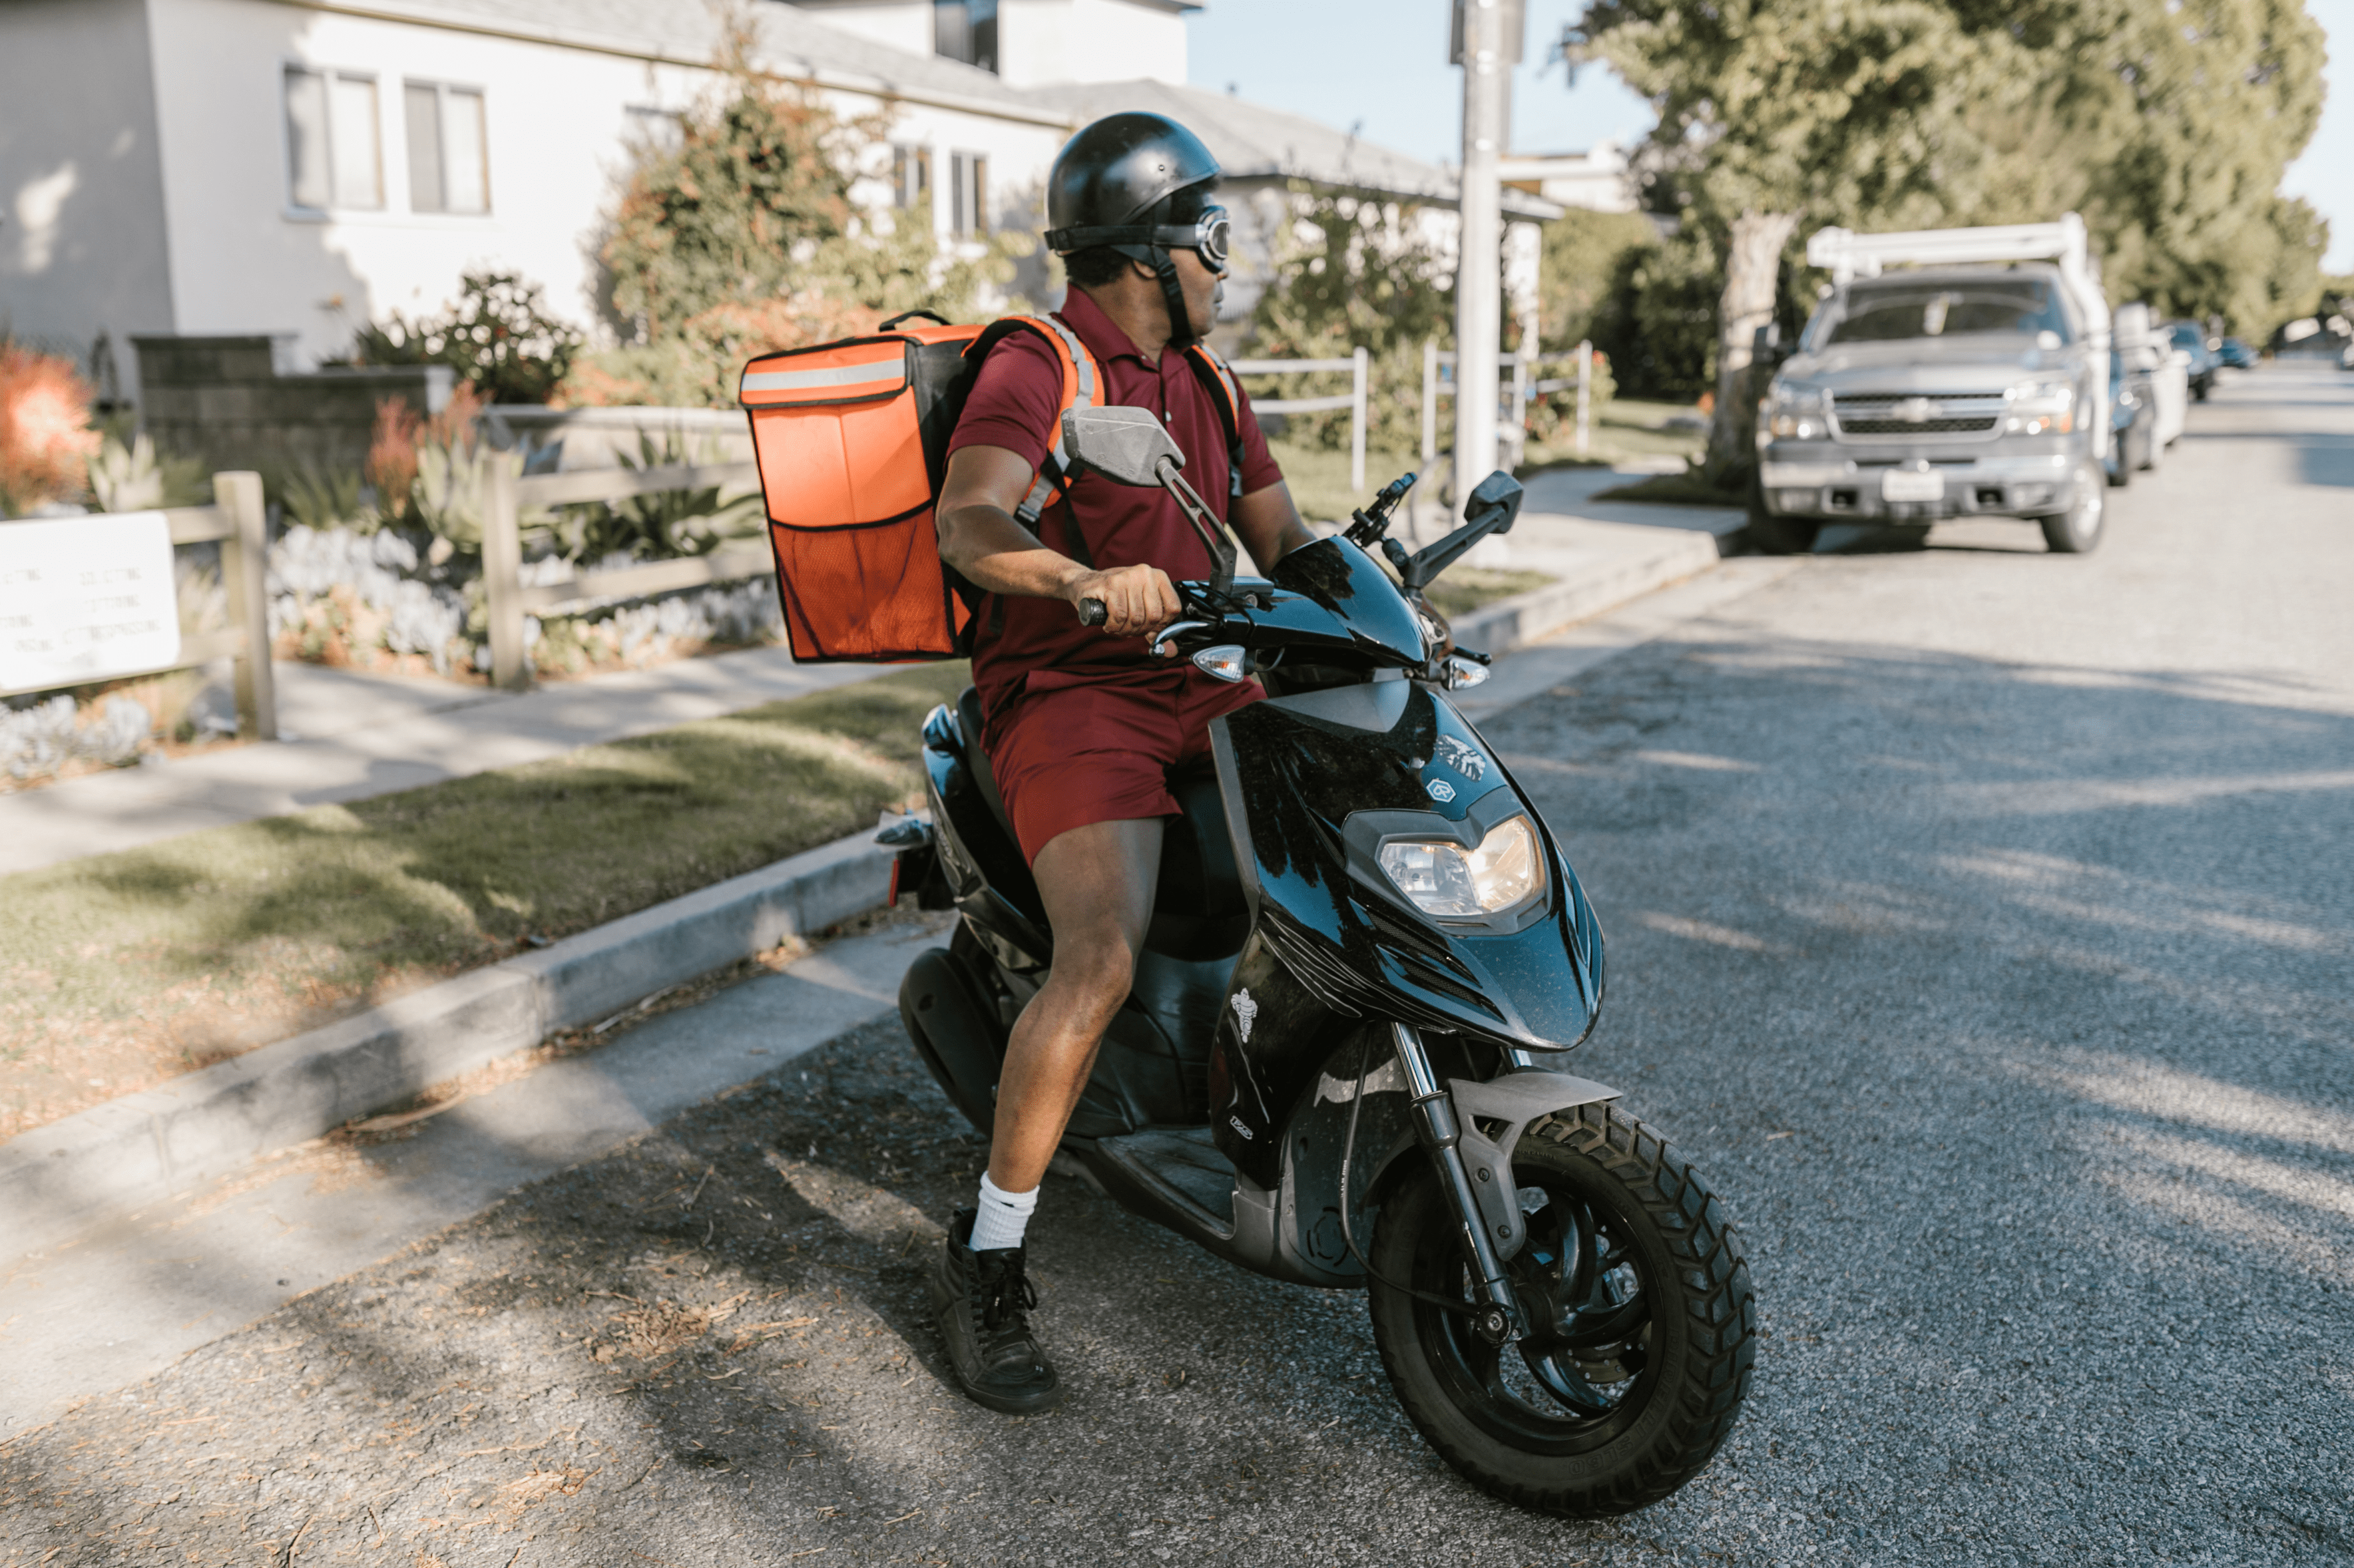 Using gas scooters to deliver is harmful to the Earth - Keego Mobility